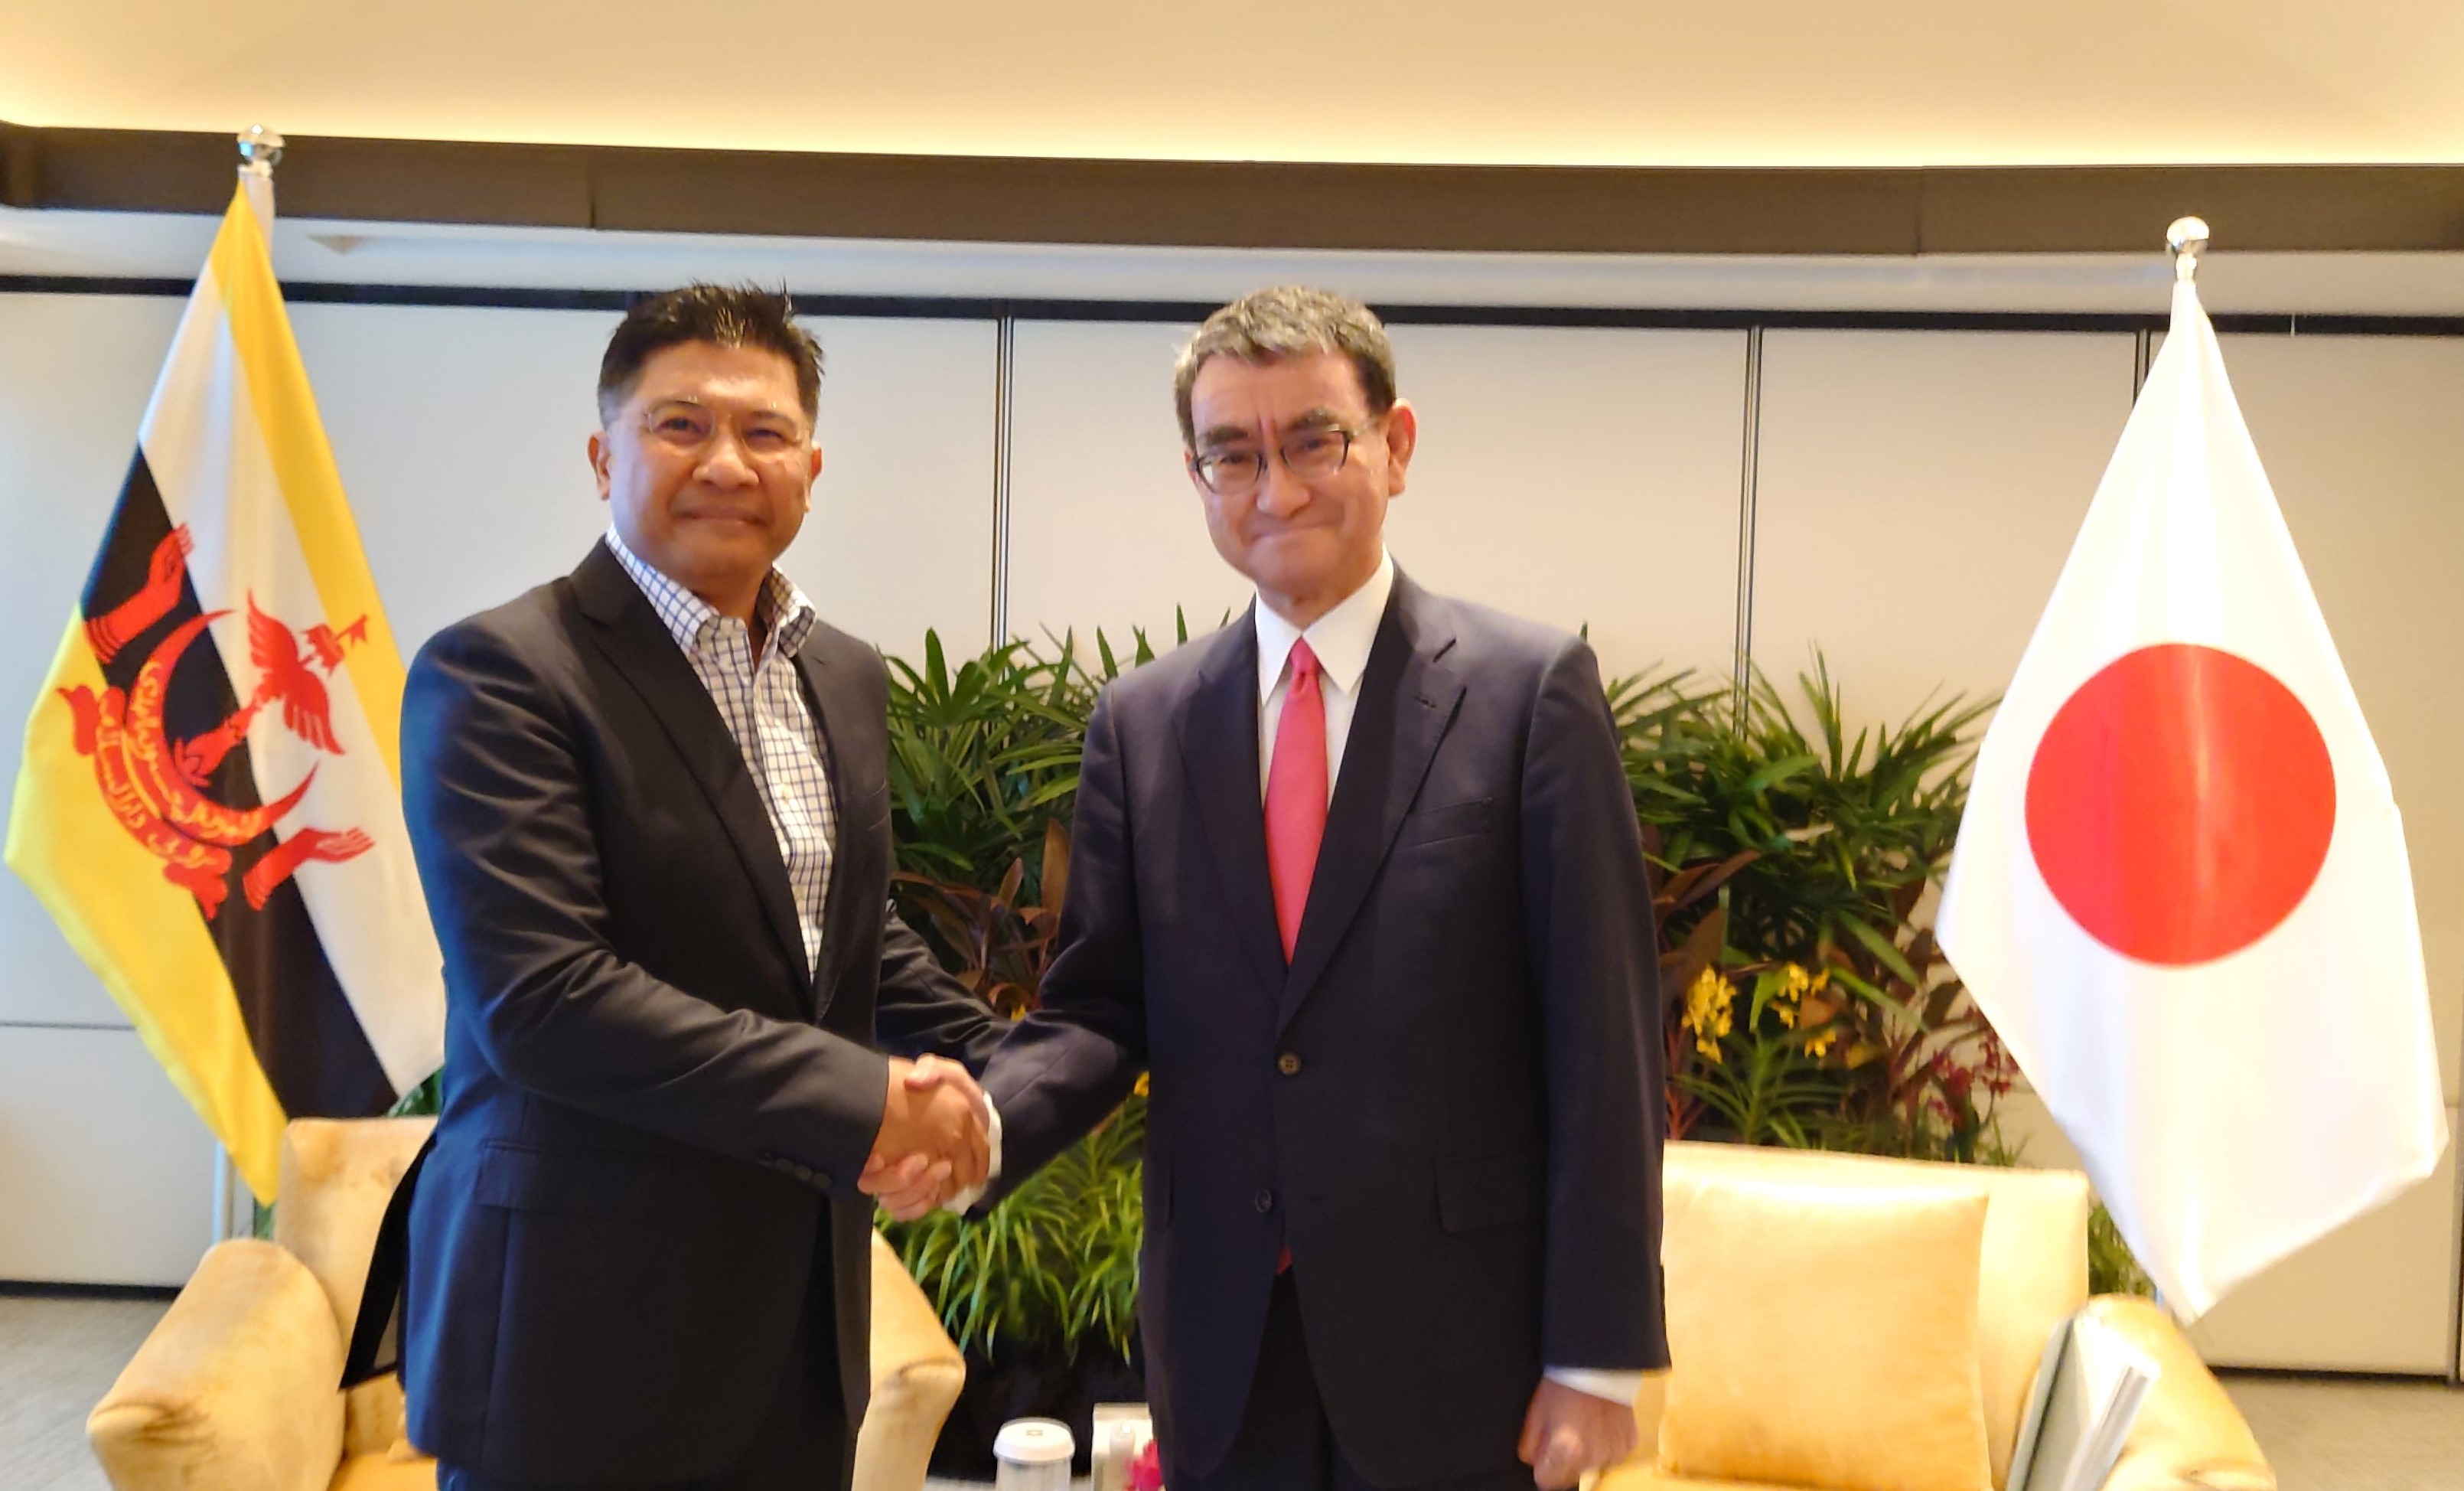 Meeting with Mr. Pengiran Dato Shamhary Mustapha, Minister of Transport and Infocommunications